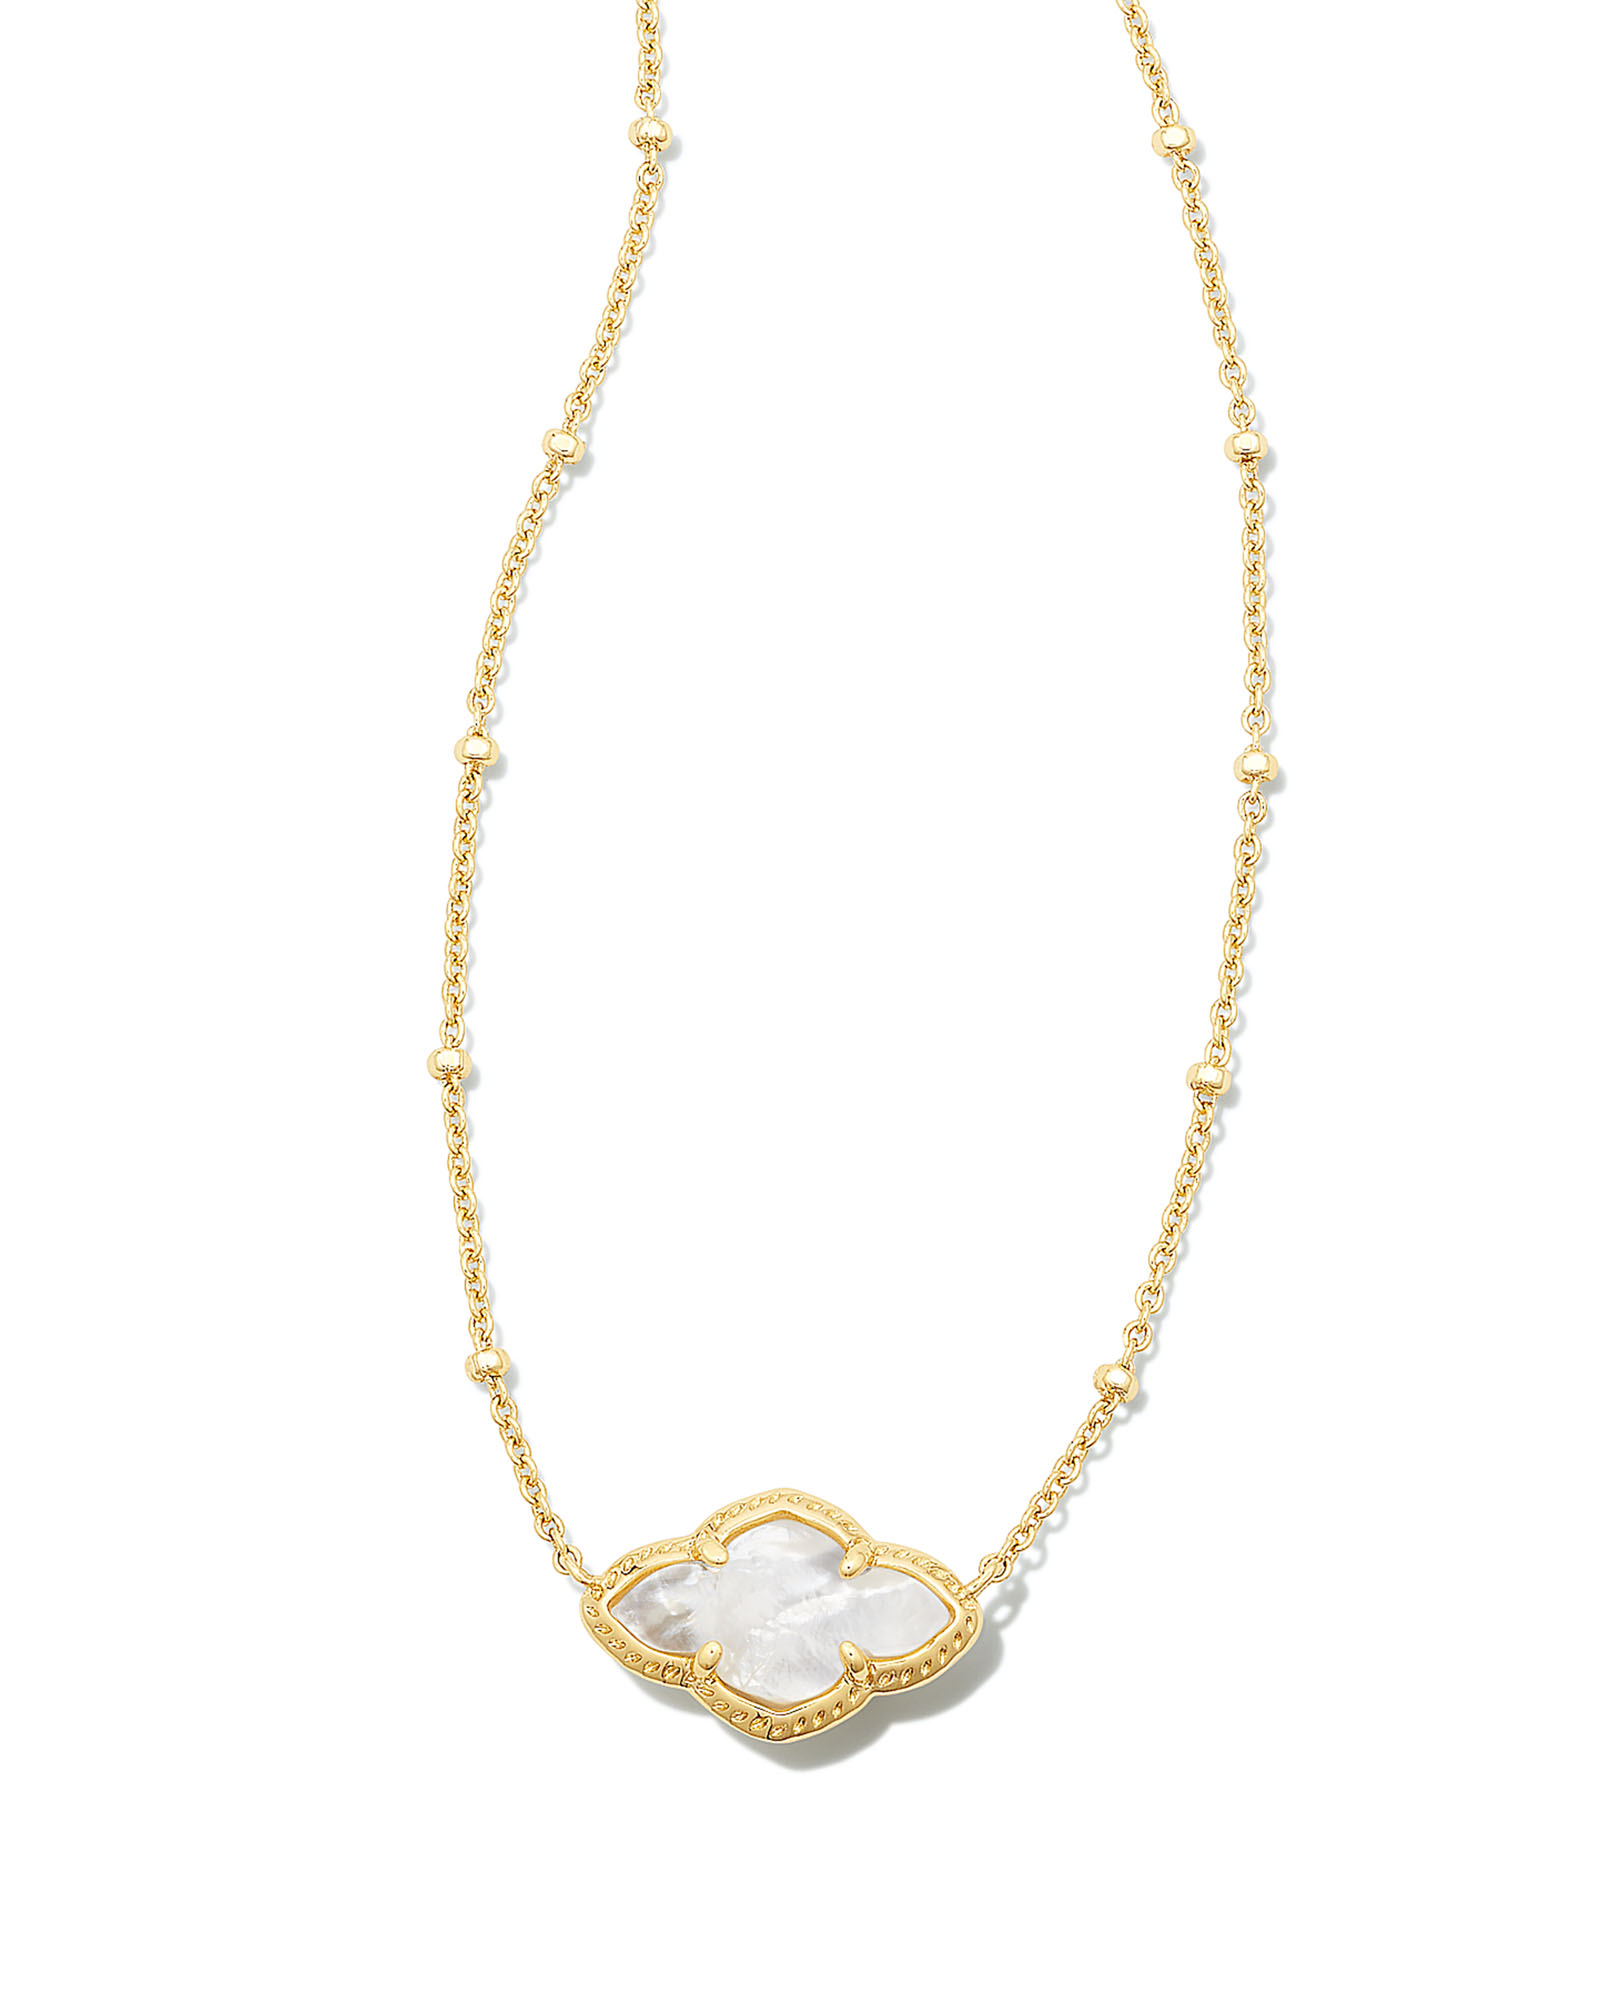 Abbie Gold Pendant Necklace in Ivory Mother-of-Pearl | Kendra Scott